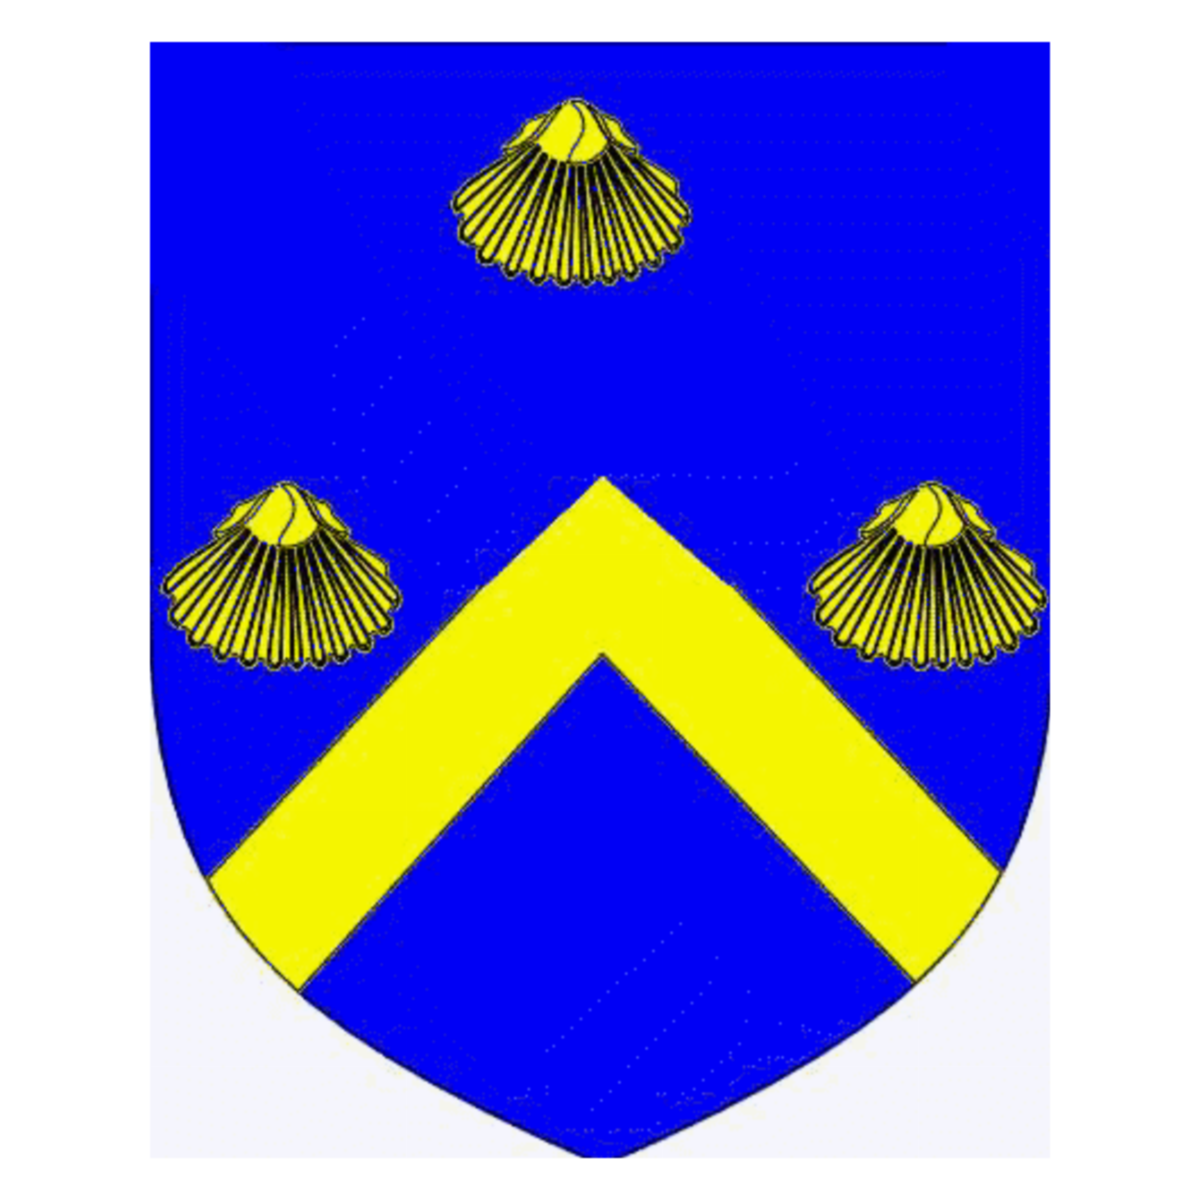 Coat of arms of family Carbone